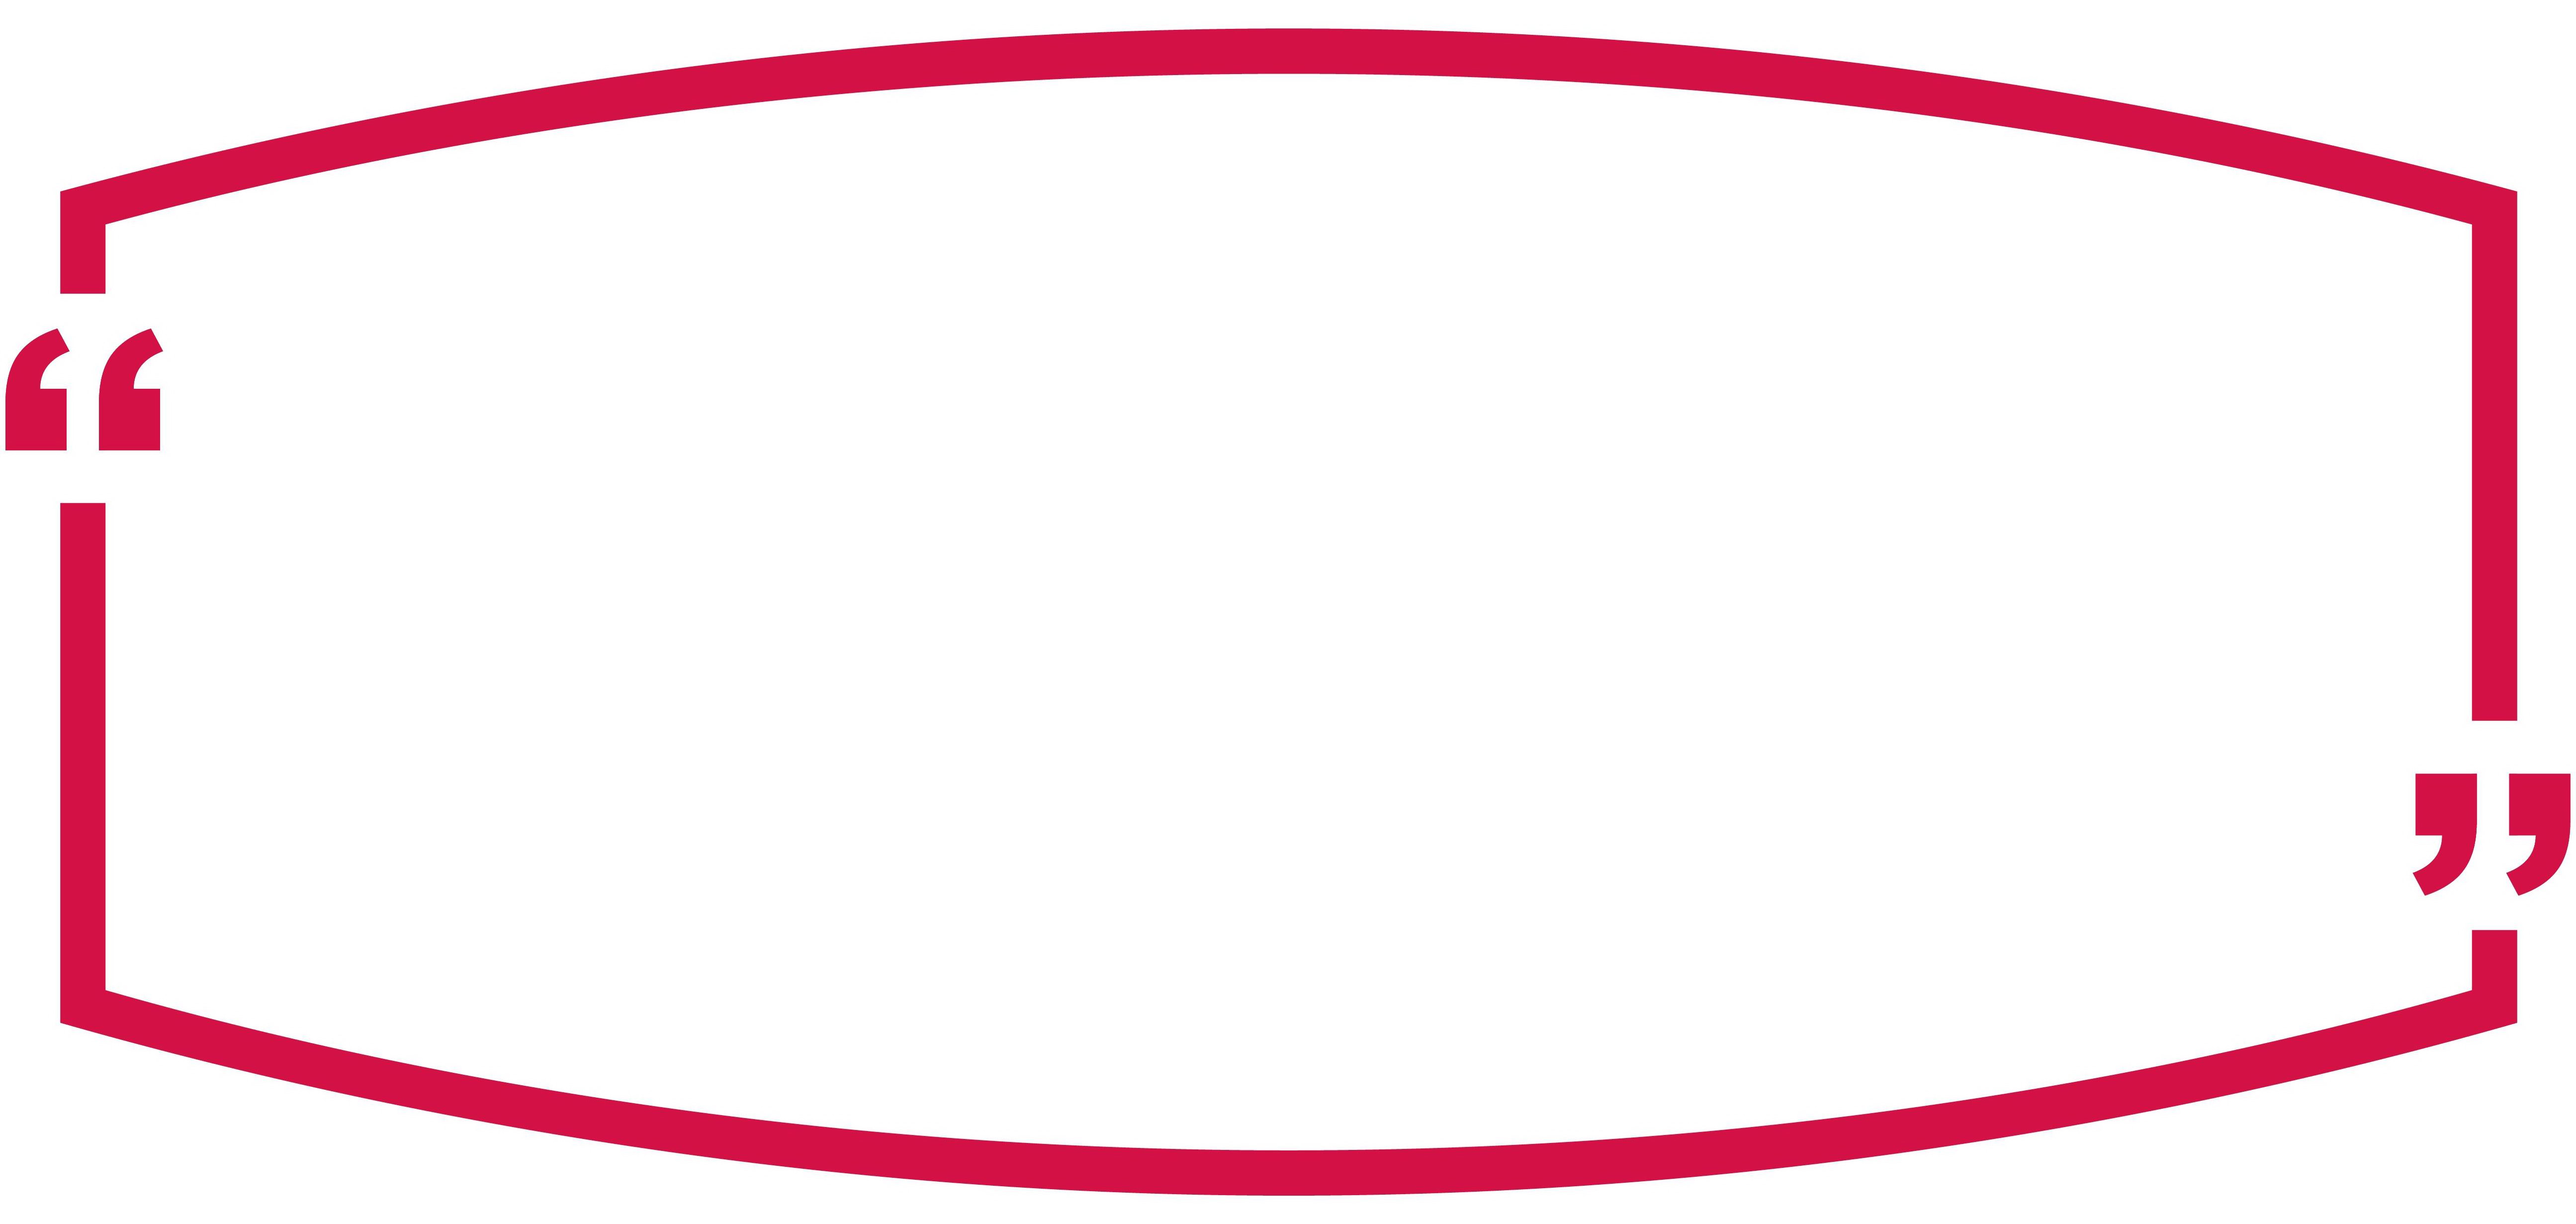  A RED OUTLINE OF A PILLOW SHAPE HAVING QUOTATION MARKS